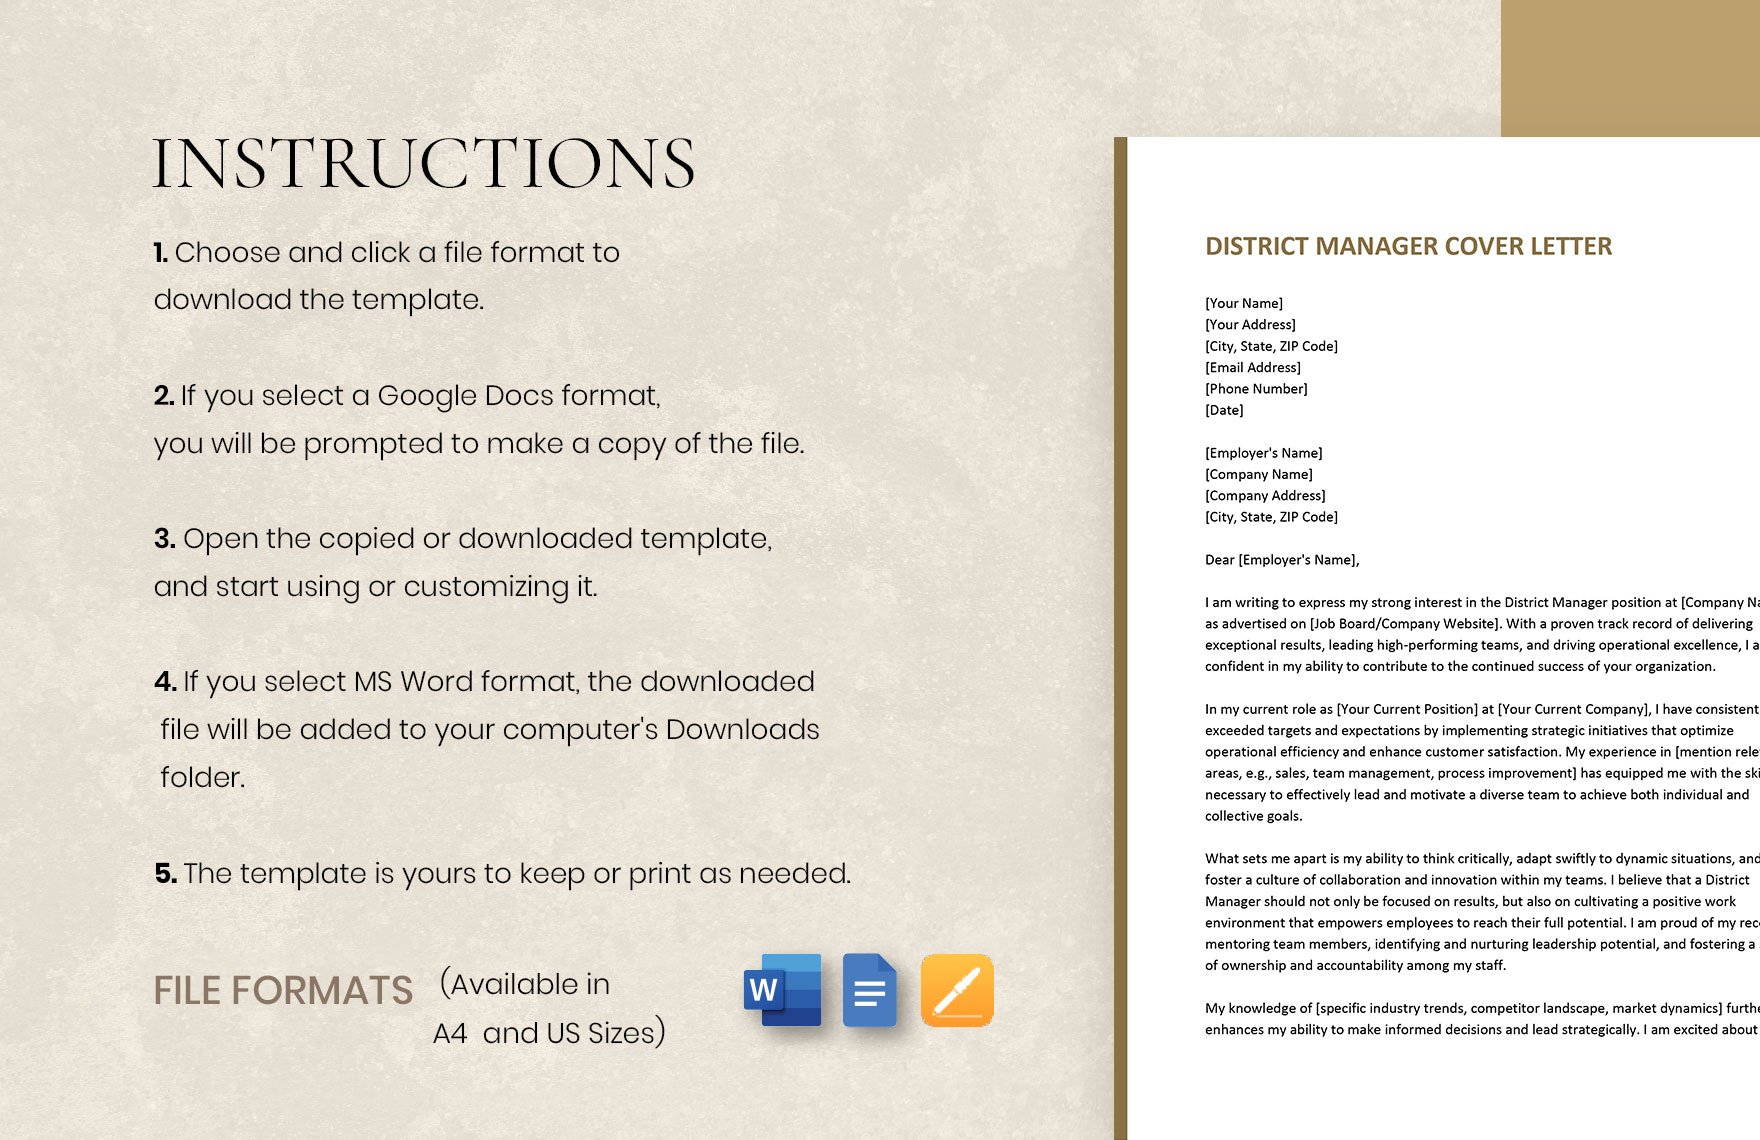 District Manager Cover Letter